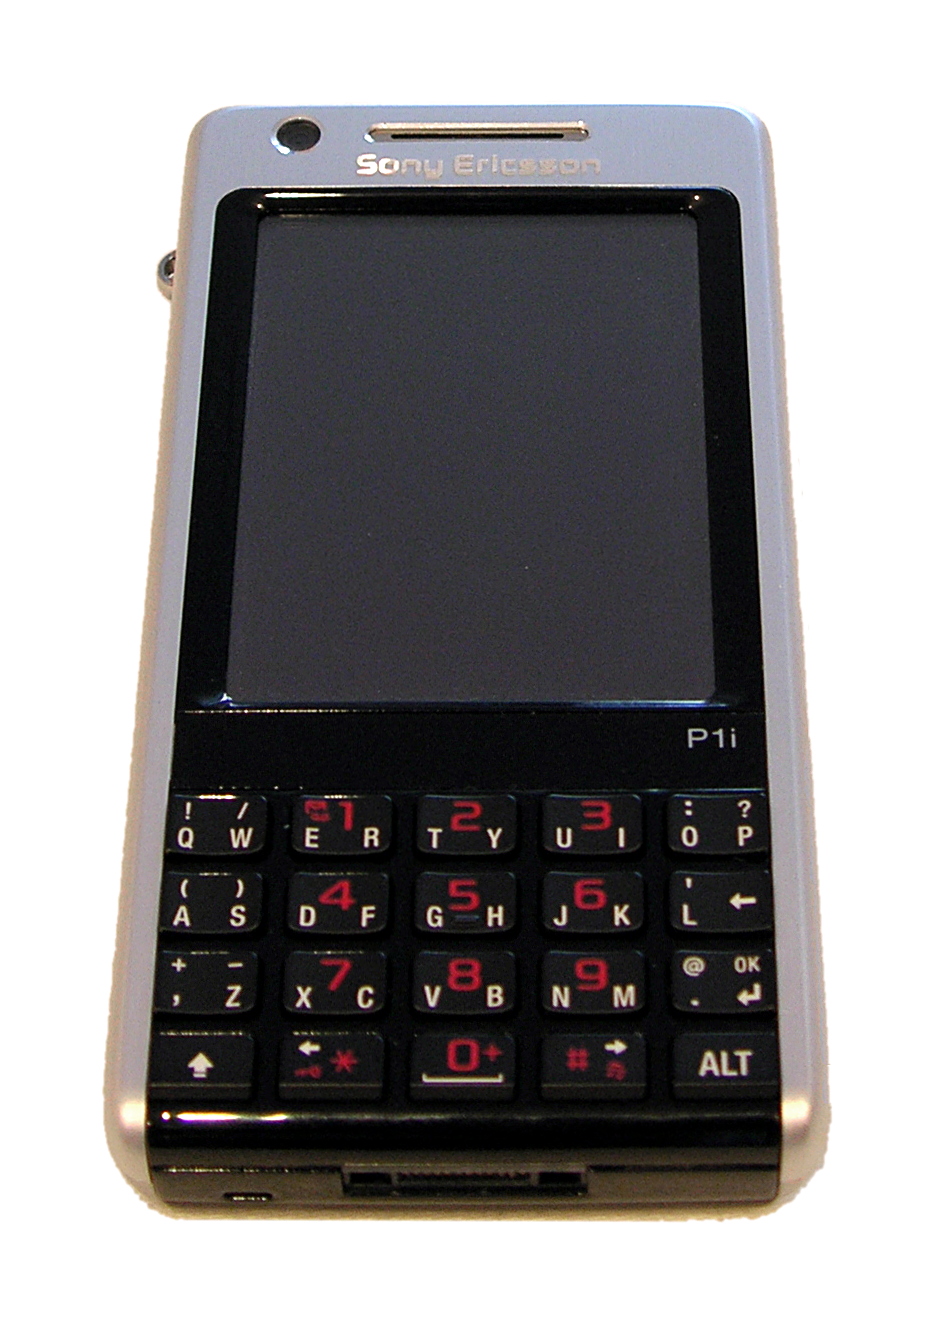 A Sony Ericsson P1i with
a physical keyboard as well as a touch screen